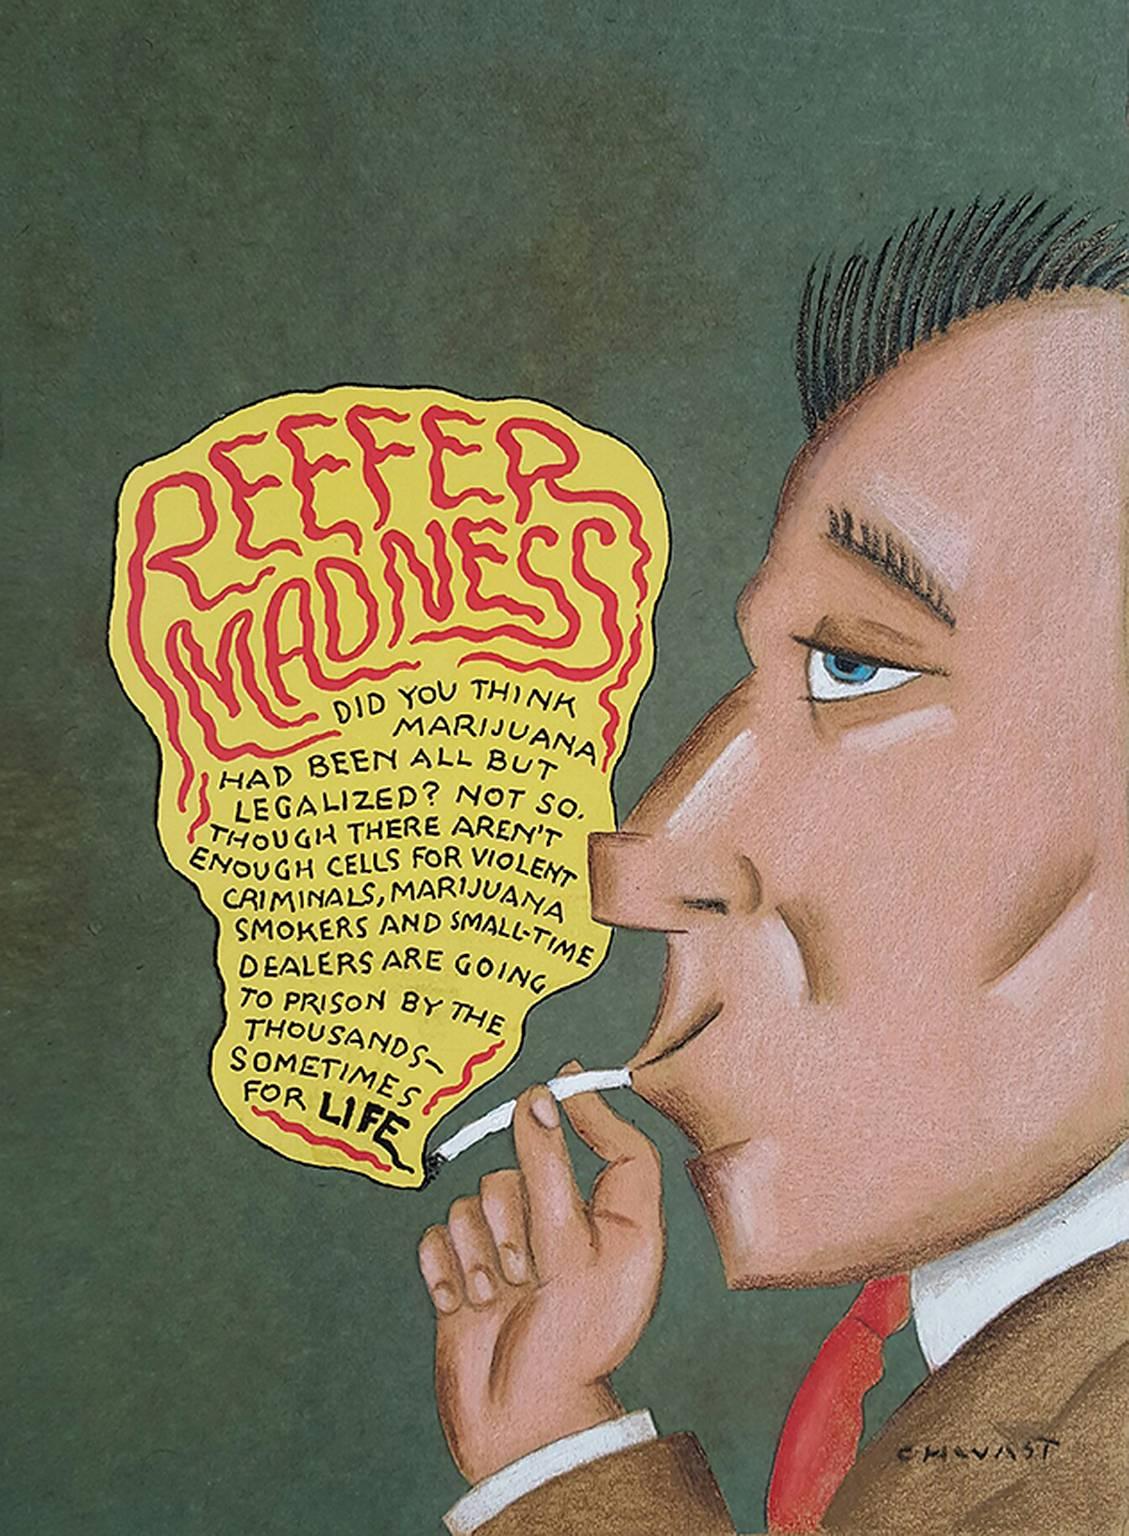 Reefer Madness, Marajuana  - Pot  - Cannabis - Cover Atlantic Monthly Magazine - Mixed Media Art by Seymour Chwast